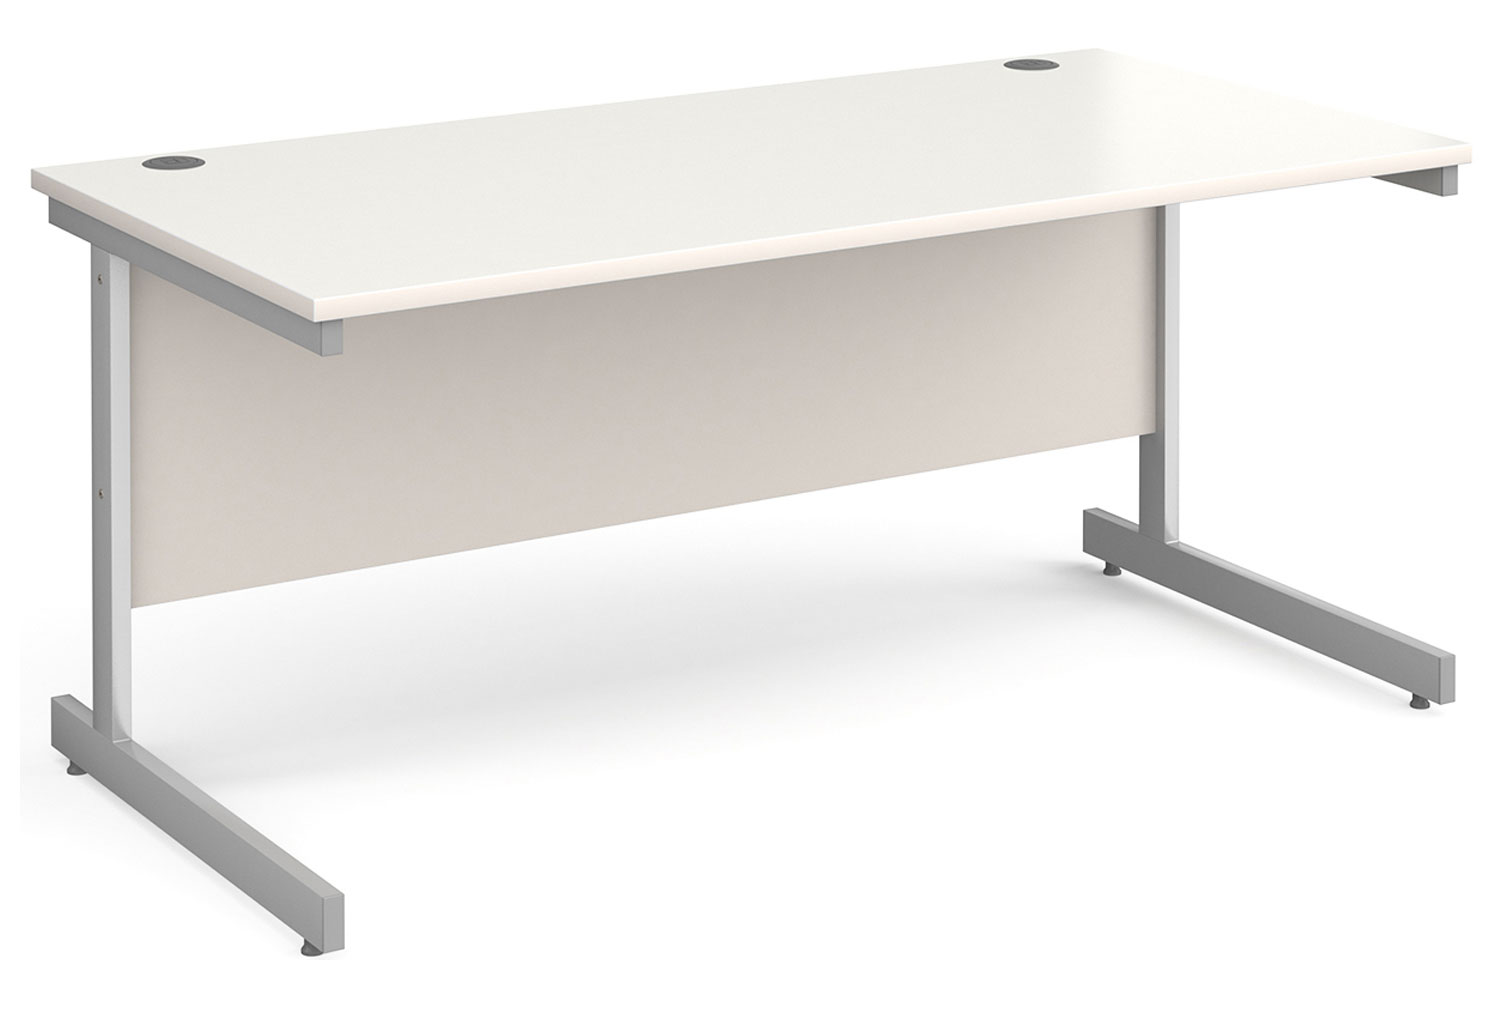 Thrifty Next-Day Rectangular Office Desk White, 160wx80dx73h (cm), Express Delivery